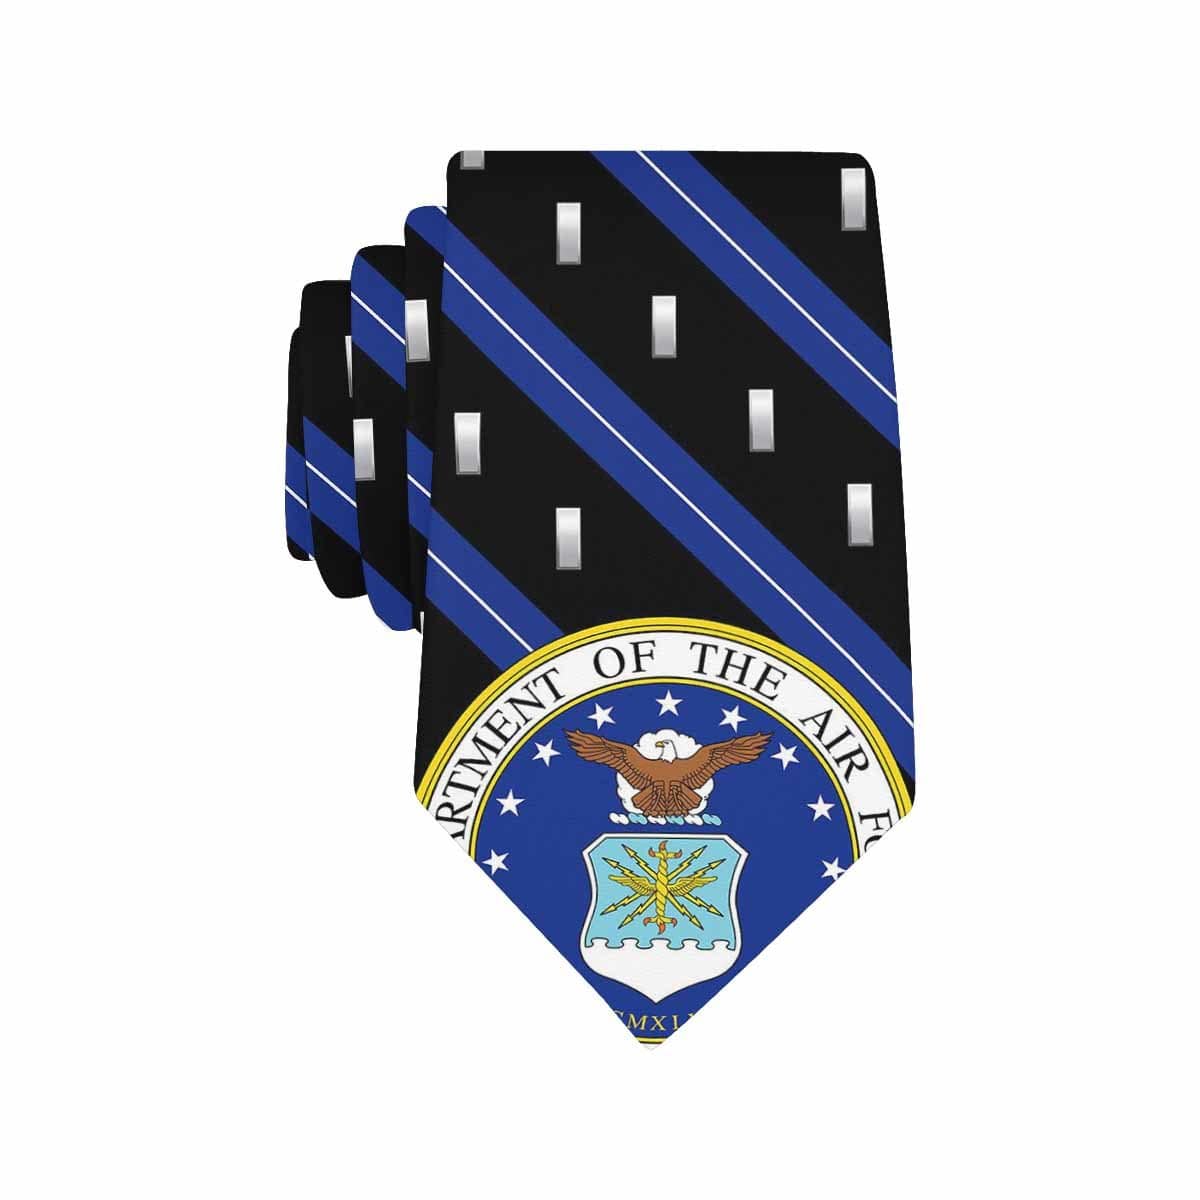 US Air Force O-2 Classic Necktie (Two Sides)-Necktie-USAF-Ranks-Veterans Nation